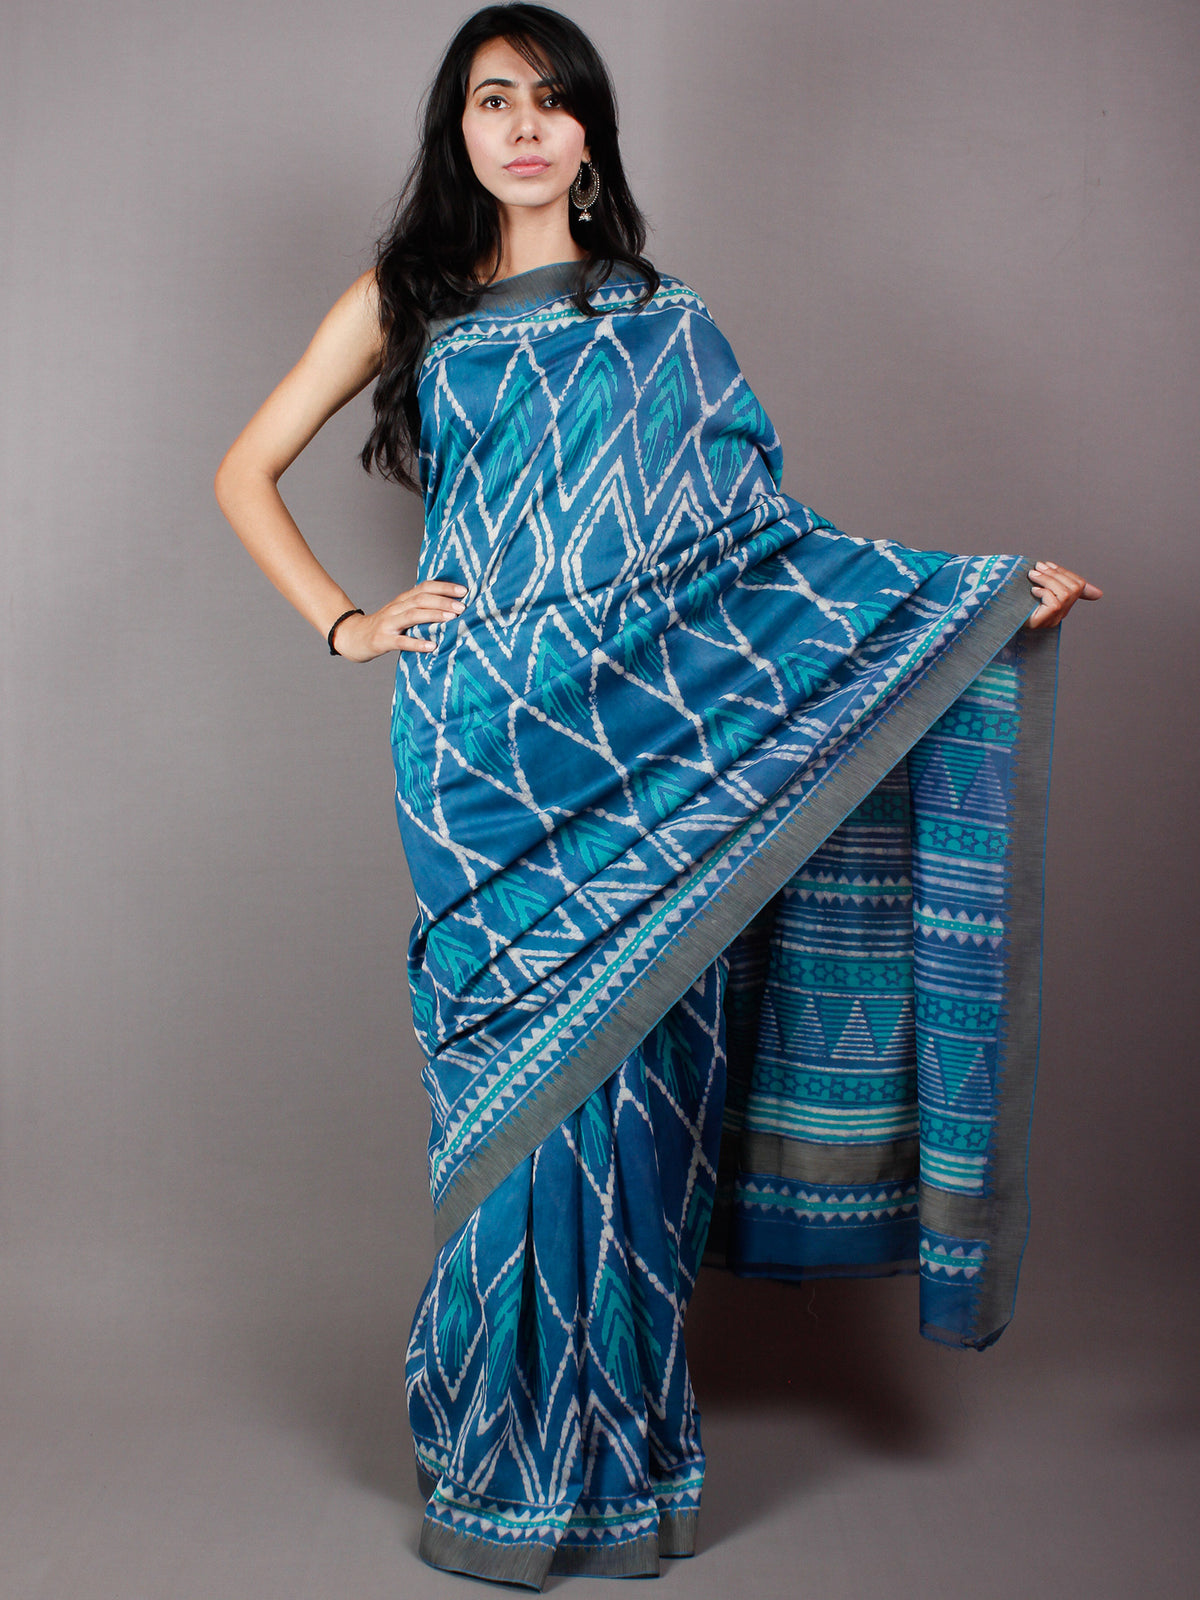 Persian & Cyan Blue Ivory Hand Block Printed in Natural Vegetable Colors Chanderi Saree With Geecha Border - S03170482